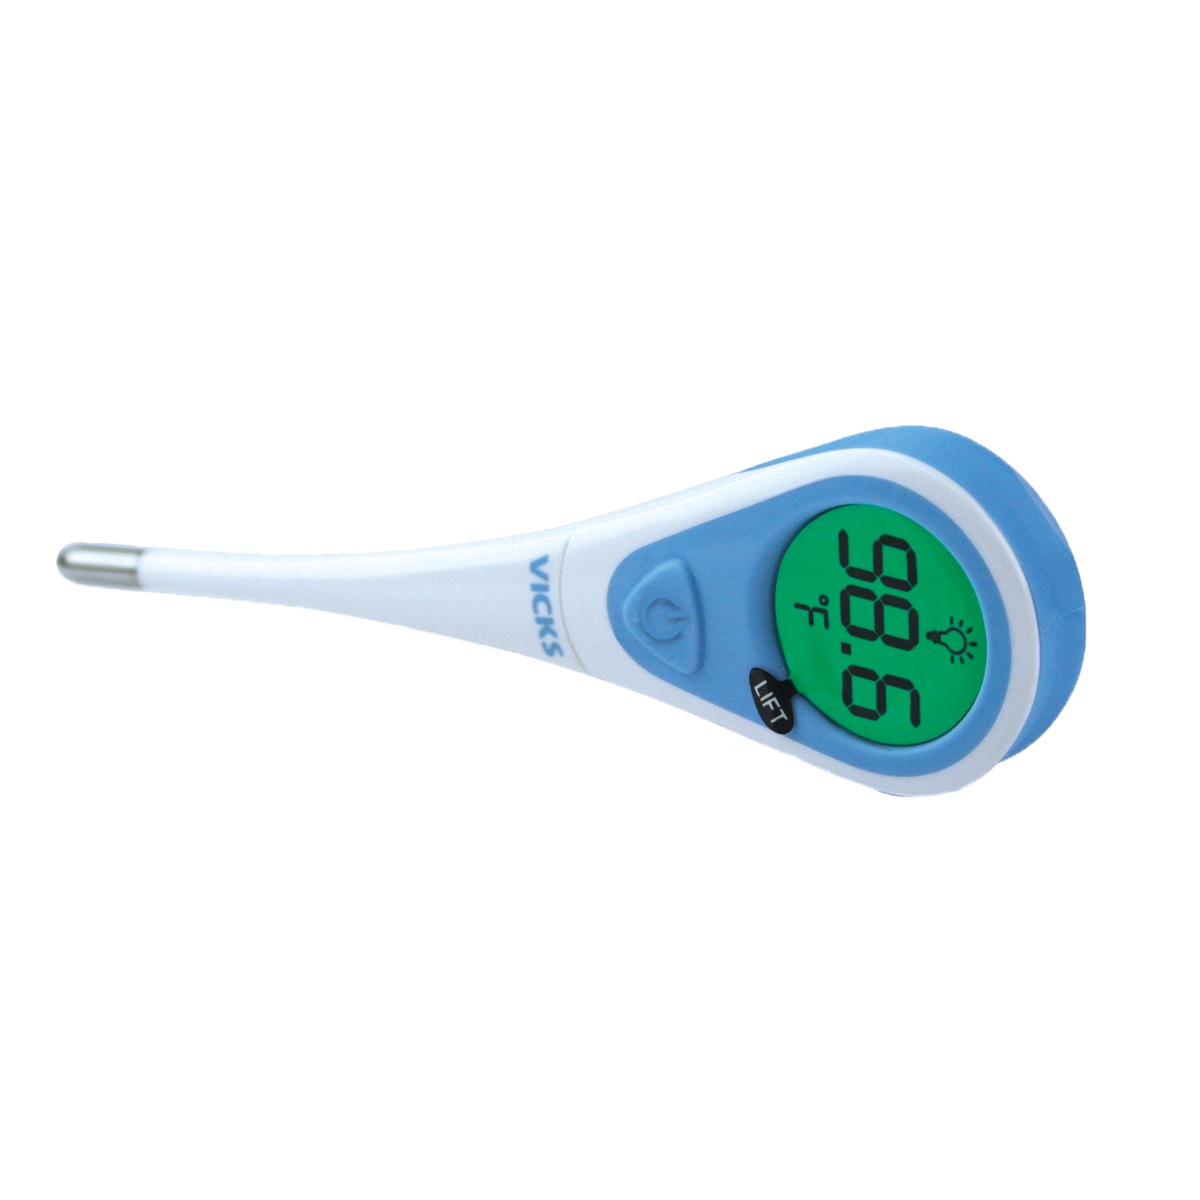 Vicks SpeedRead Digital Thermometer with Fever InSight